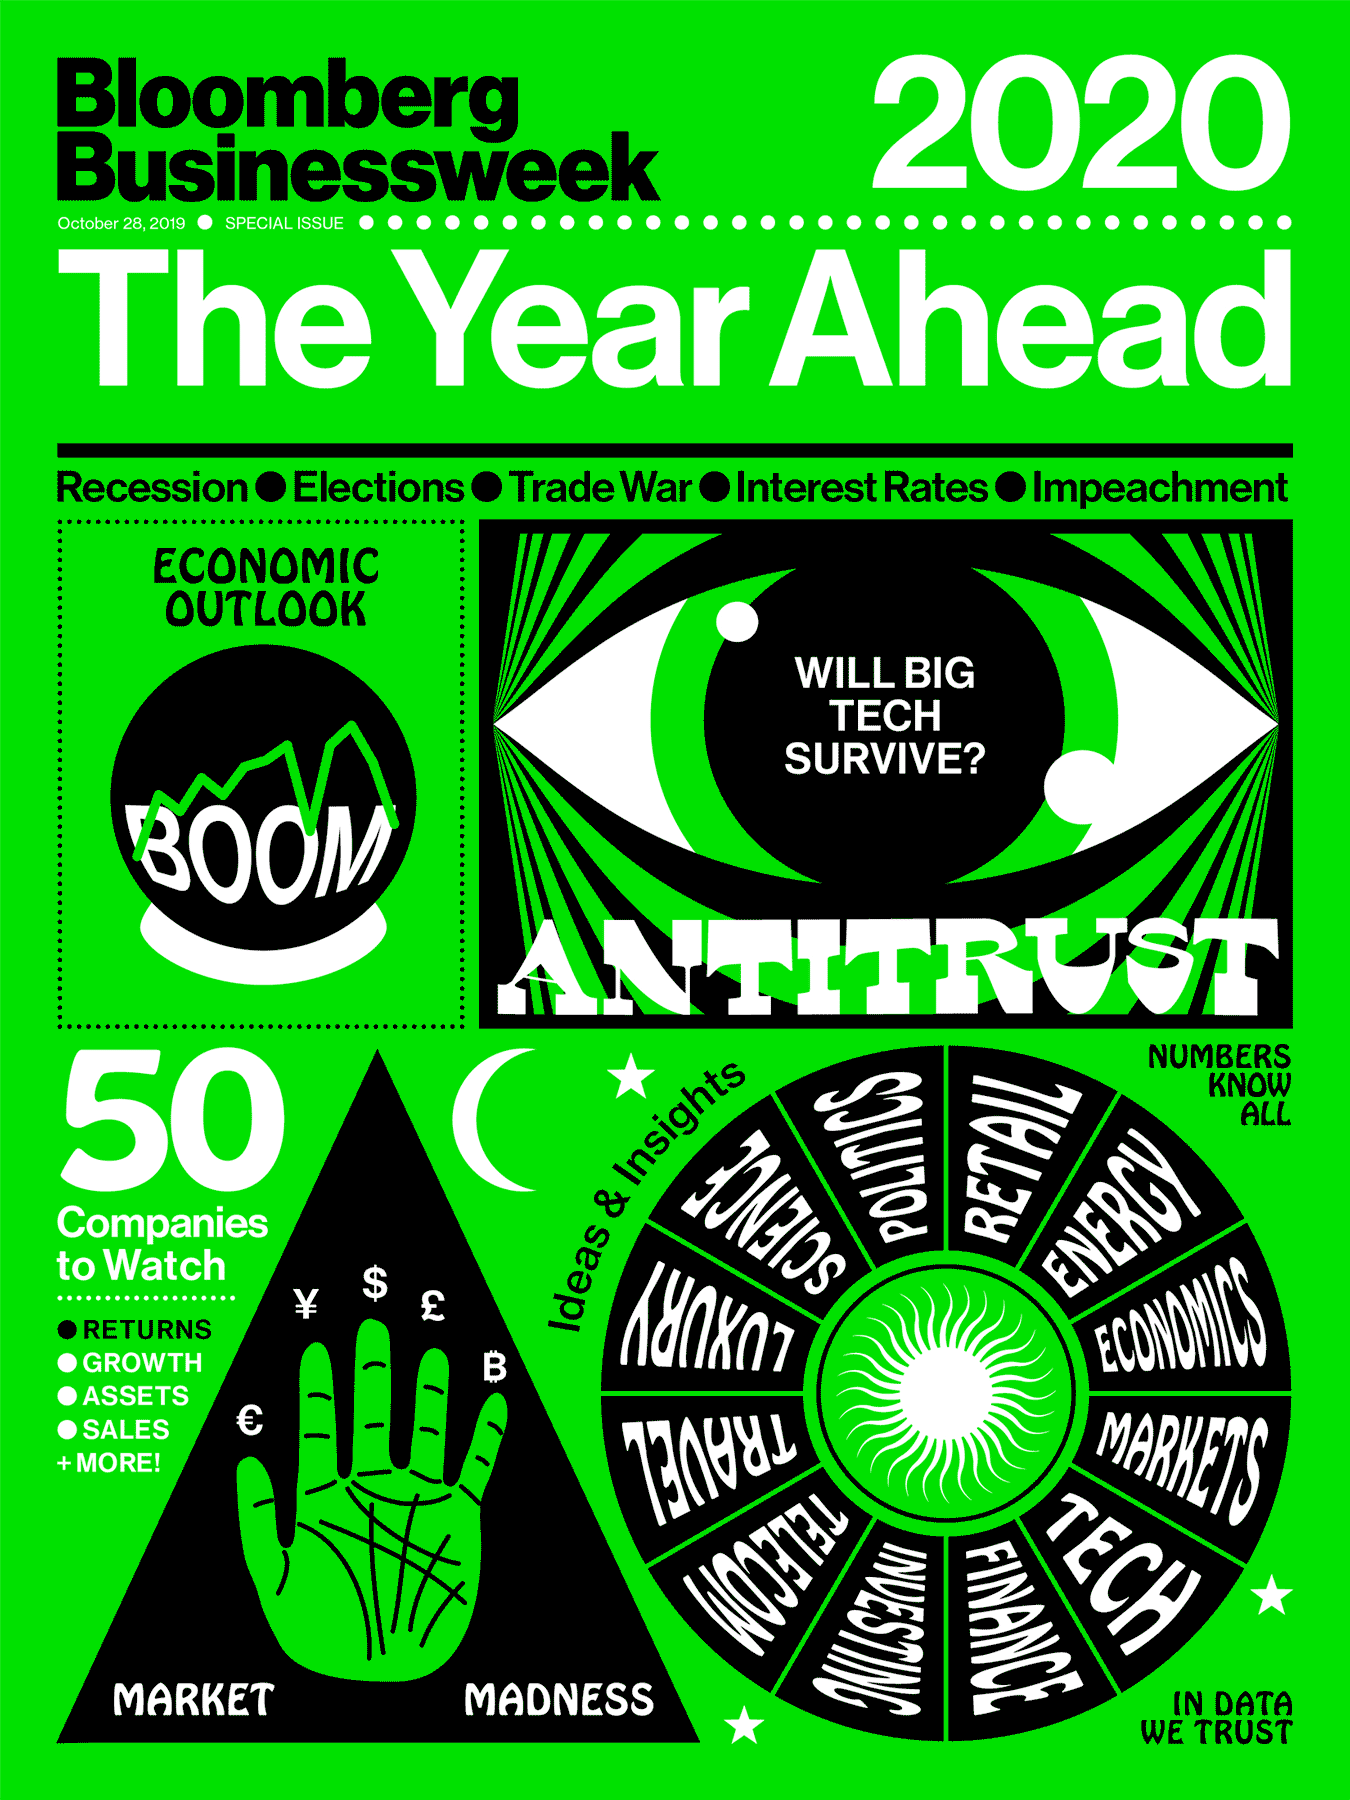 Featured in <em>Bloomberg Businessweek</em>, Oct. 28, 2019. For more stories from The Year Ahead, <a href="https://www.bloomberg.com/the-year-ahead-2020">click here</a>.<br/> <a href="https://www.bloomberg.com/subscriptions" target="_blank">Subscribe now.</a>